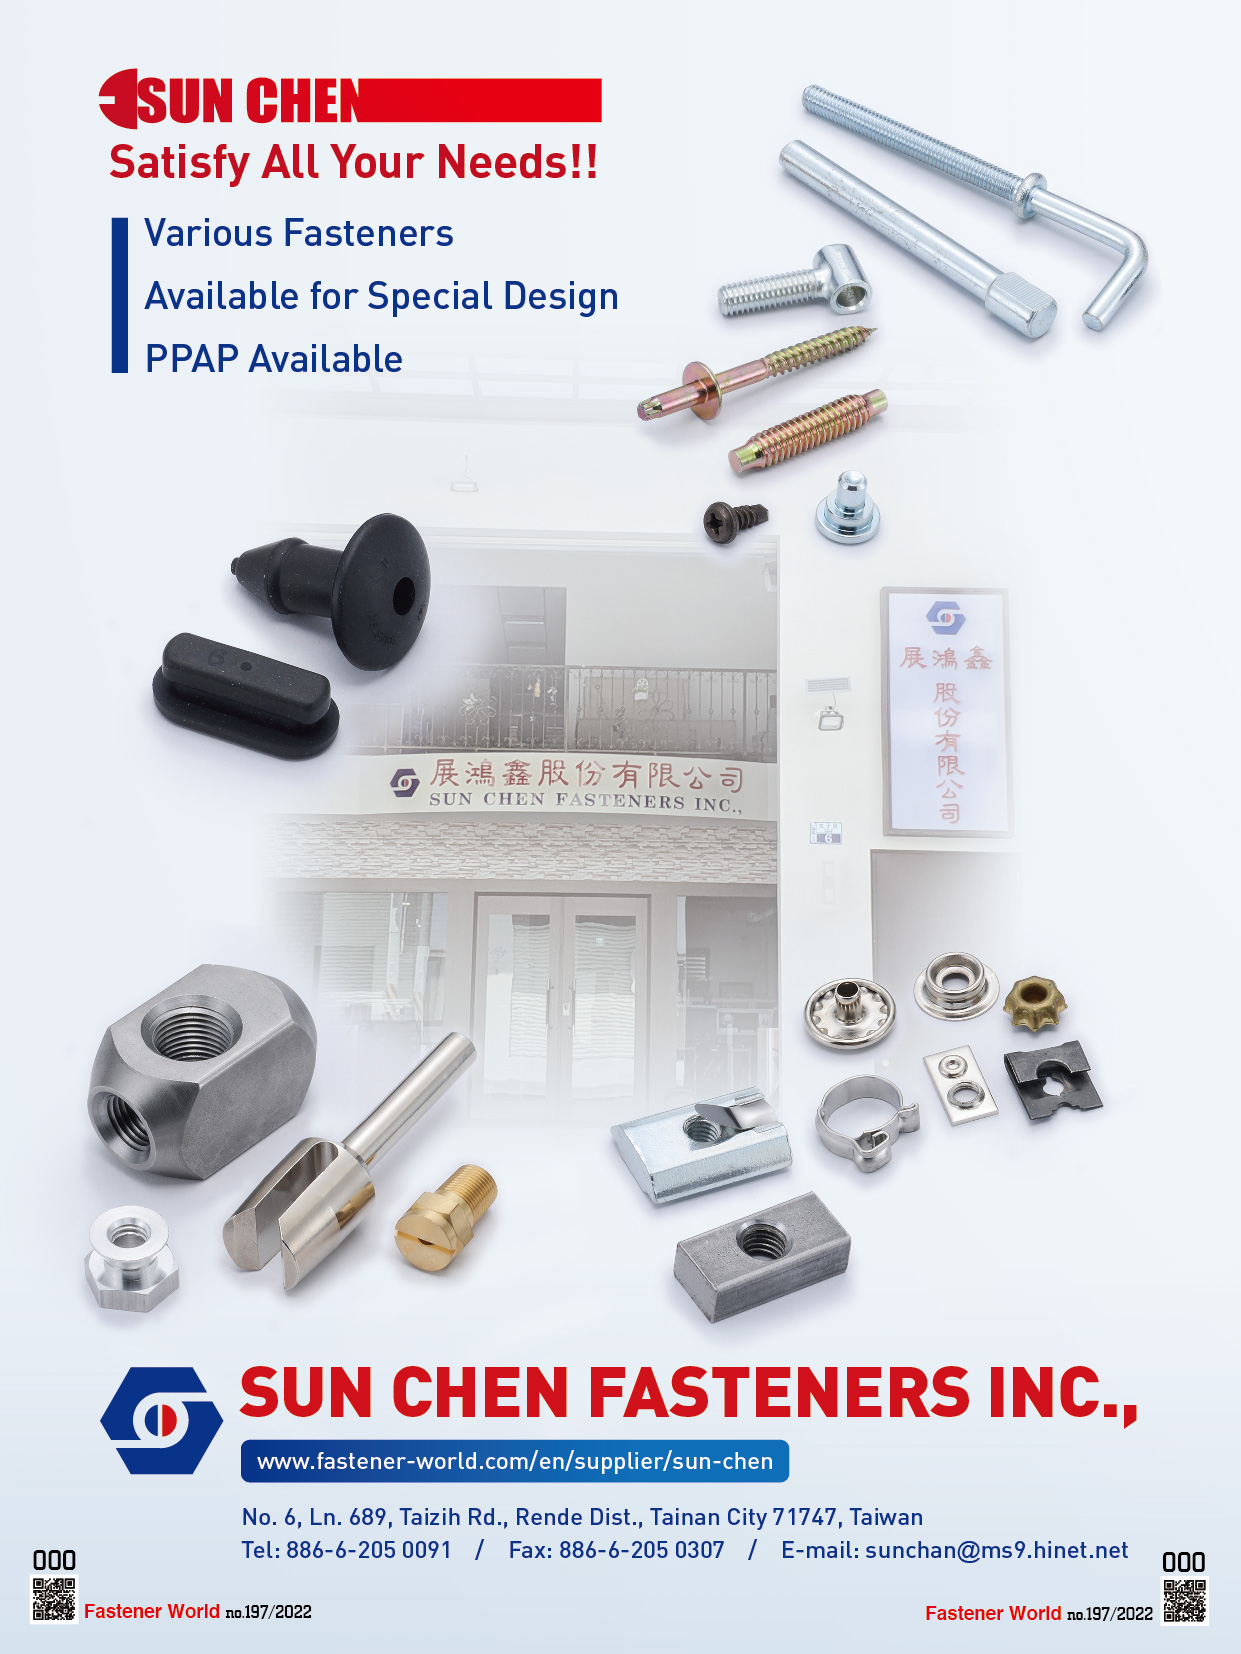 SUN CHEN FASTENERS INC., , Cup Washers, Flanged Head Bolts, T-head or T-slot Bolts...